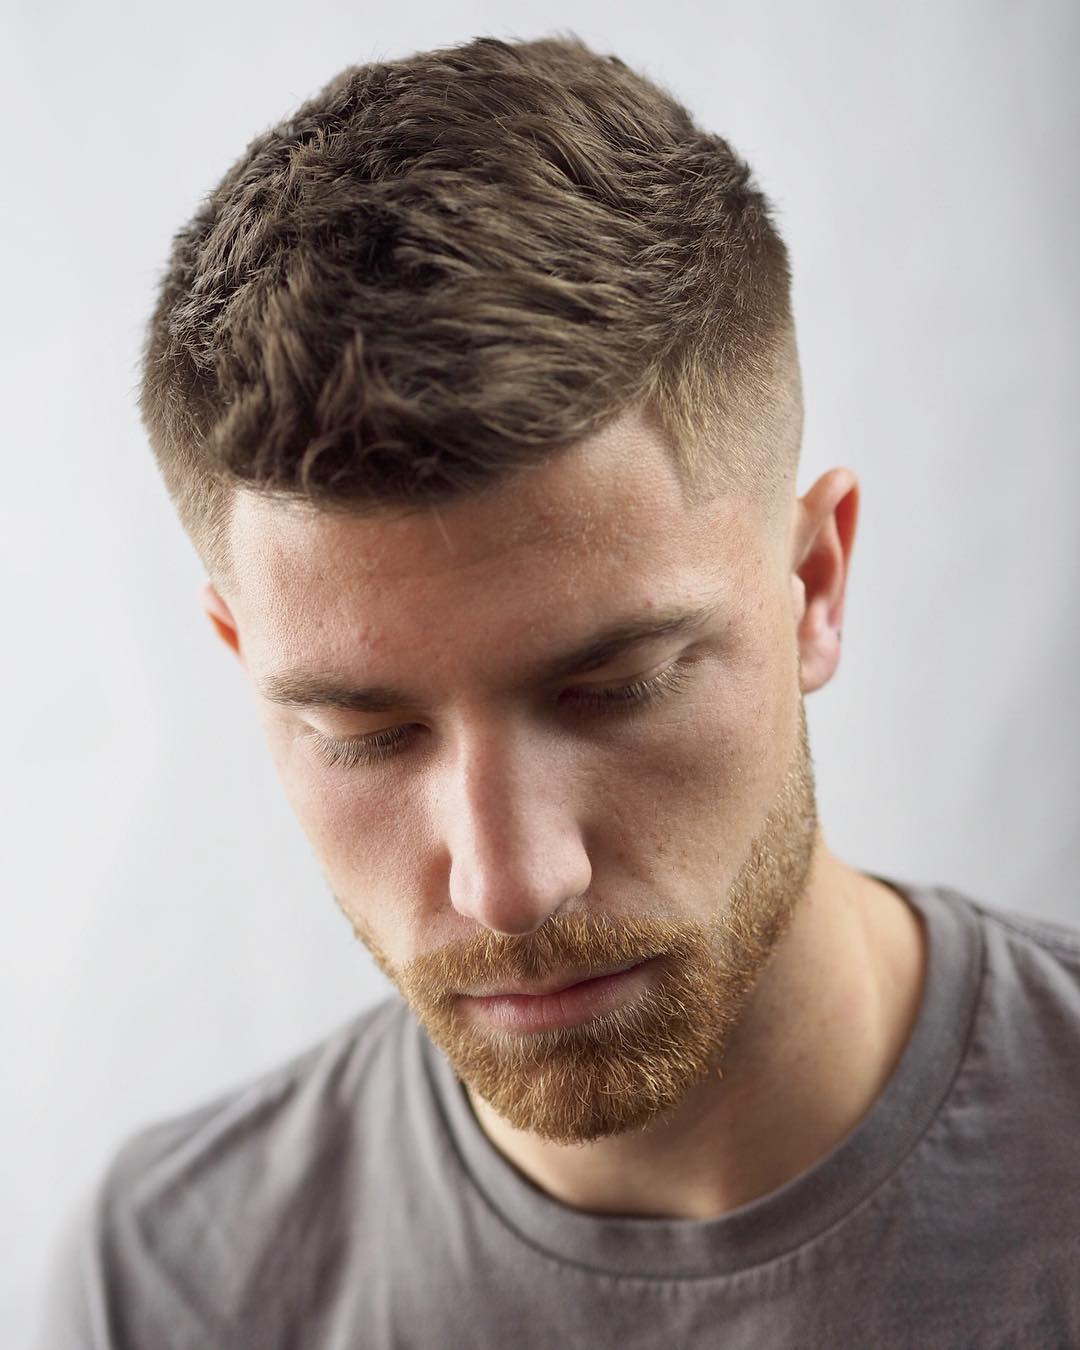 The Best Short Haircuts For Men (2018 Update) The Best Short Haircuts